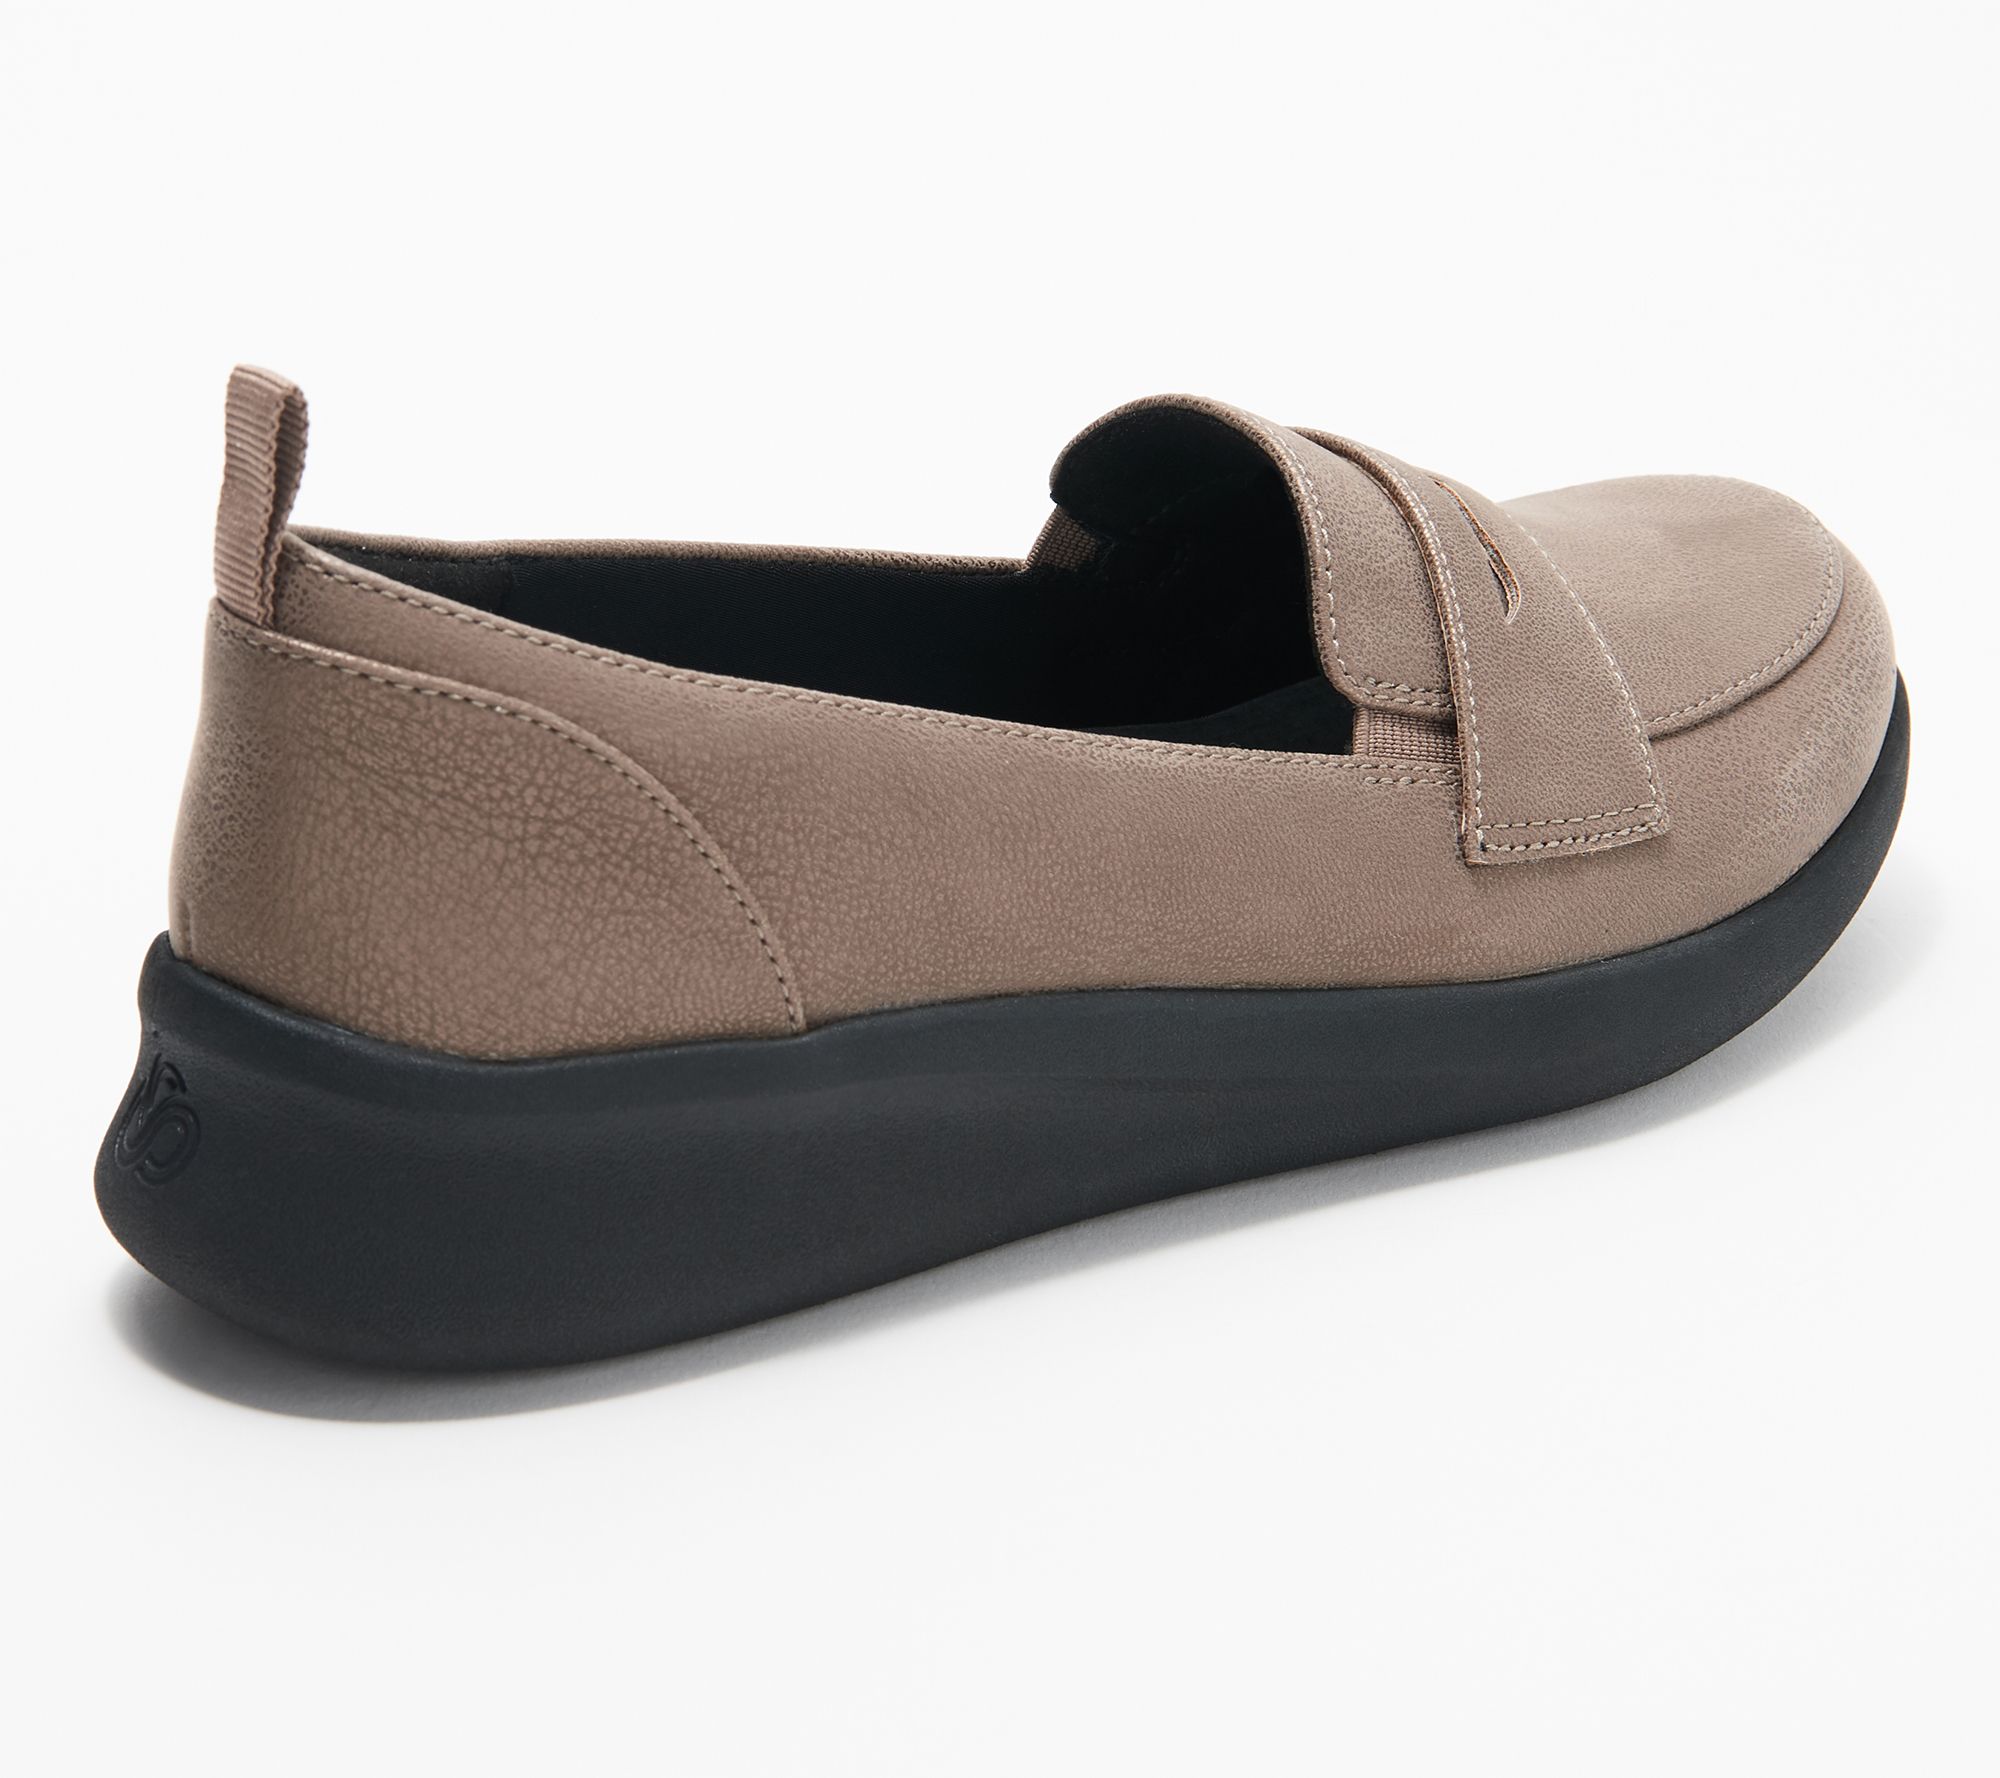 CLOUDSTEPPERS by Clarks Slip-On Loafers 